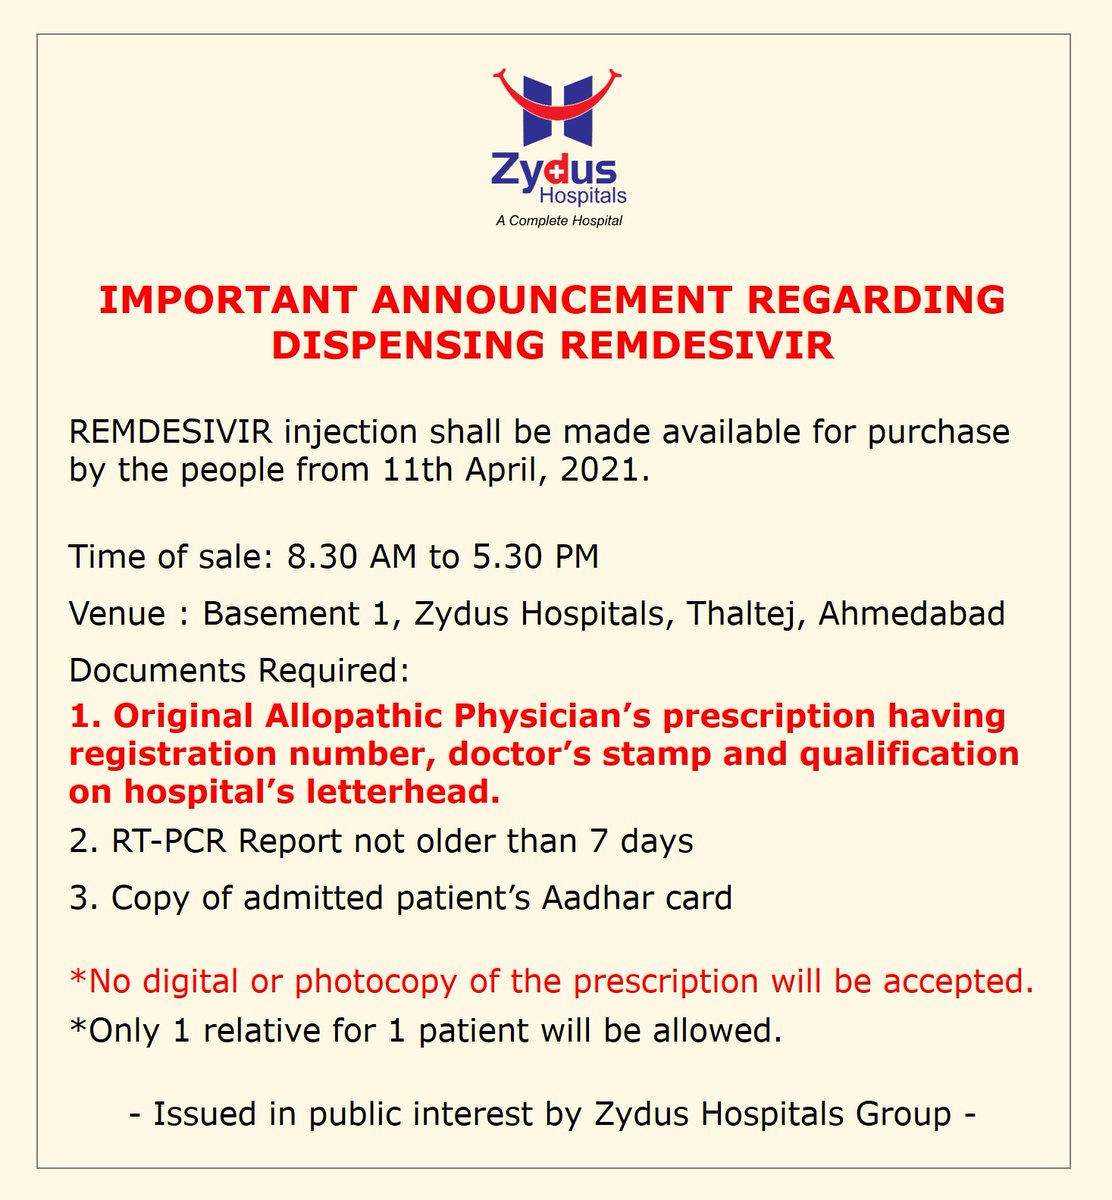 An ORIGINAL ALLOPATHIC PHYSICIAN'S PRESCRIPTION having registration number, stamp and qualification on hospital’s letterhead will be required for sale of #Remdesivir from #ZydusCadila. This is in addition to RT-PCR Report not older than 7 days and a copy of patient’s Aadhar card. https://t.co/IbHPDBD4zr